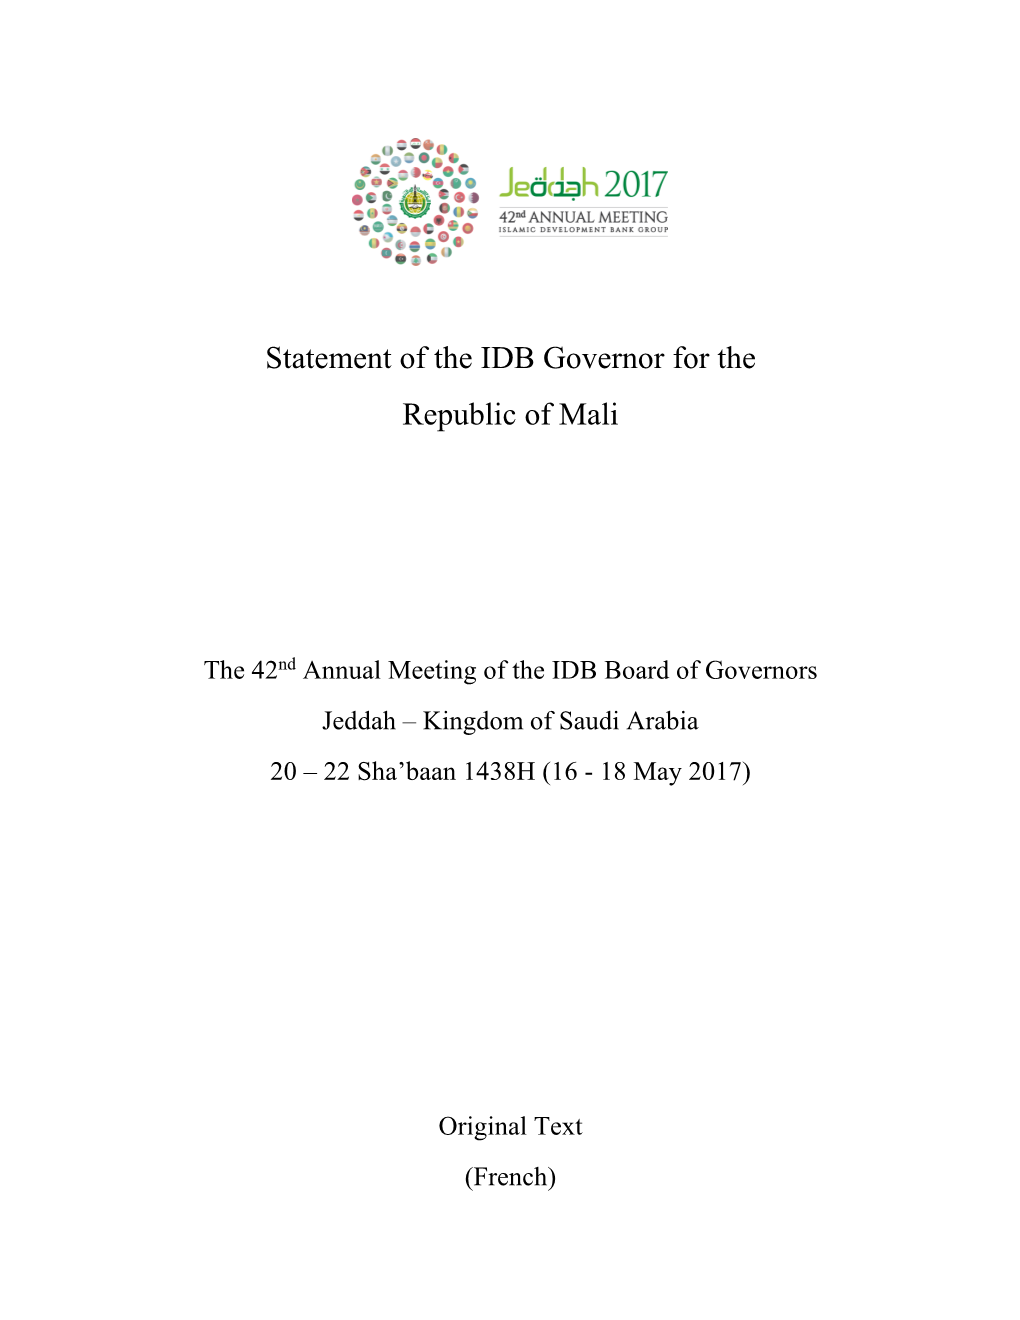 Statement of the IDB Governor for the Republic of Mali